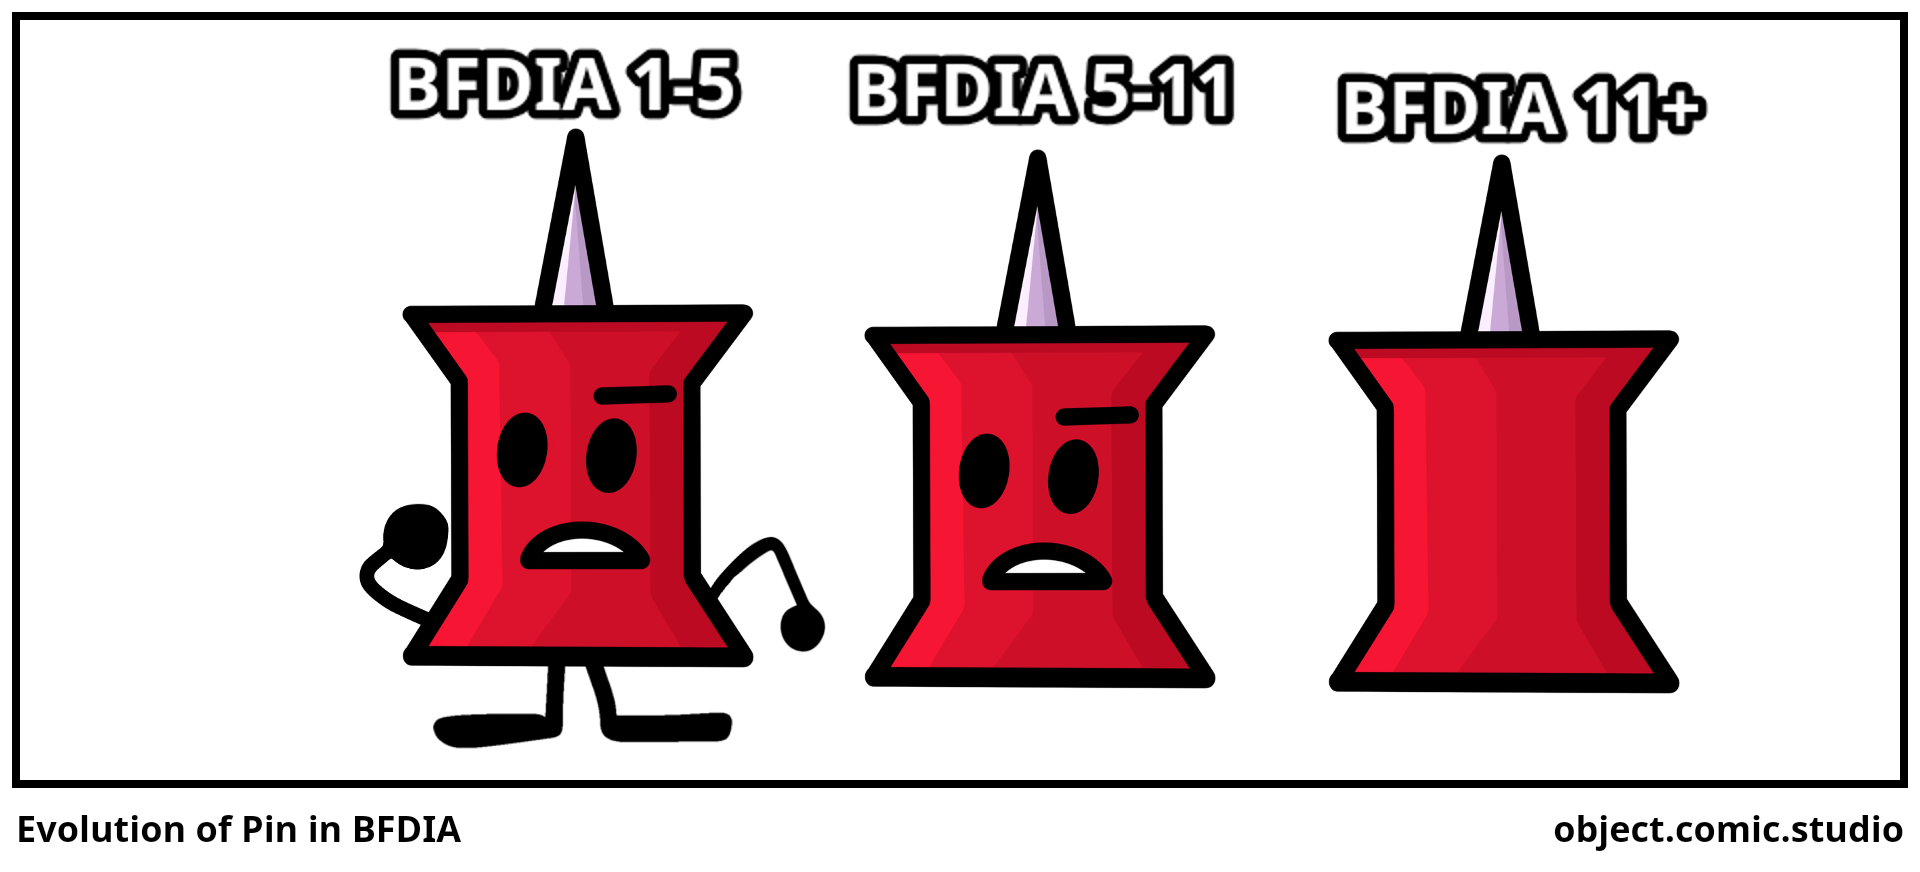 Evolution of Pin in BFDIA